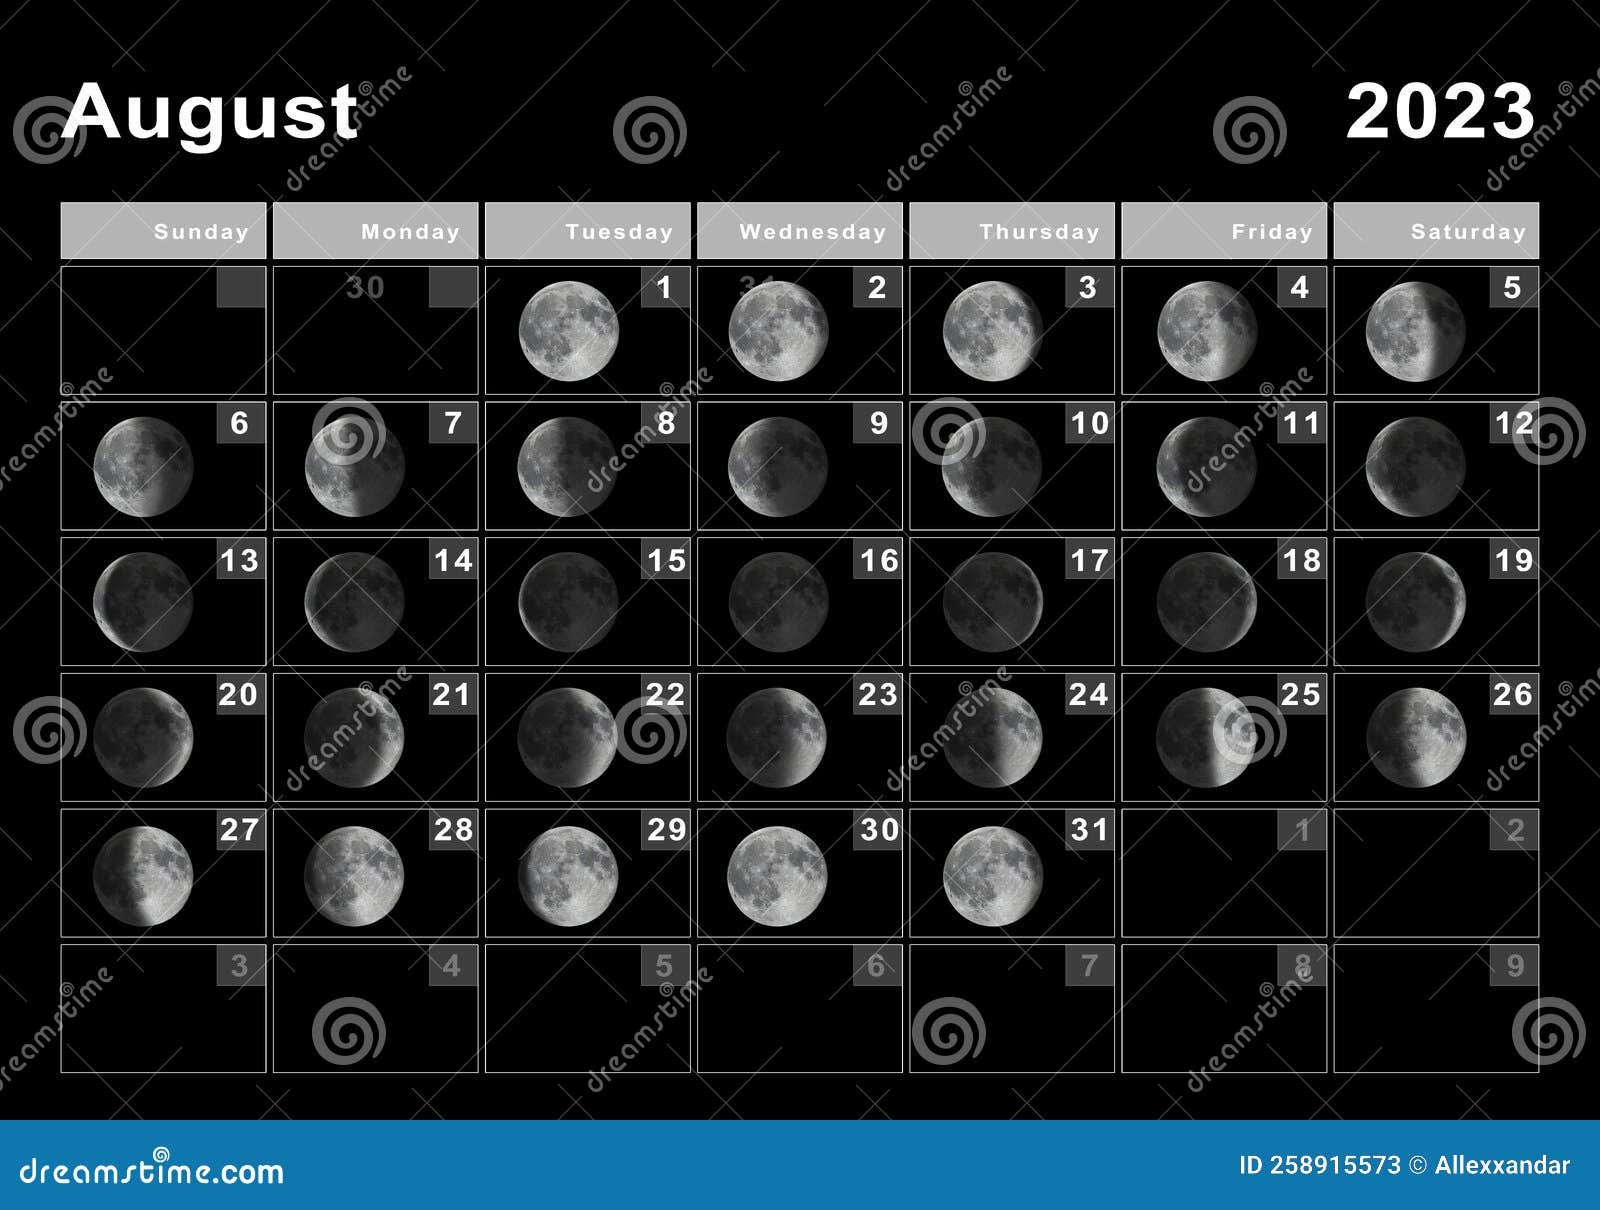 New Moon August 2023 Meaning